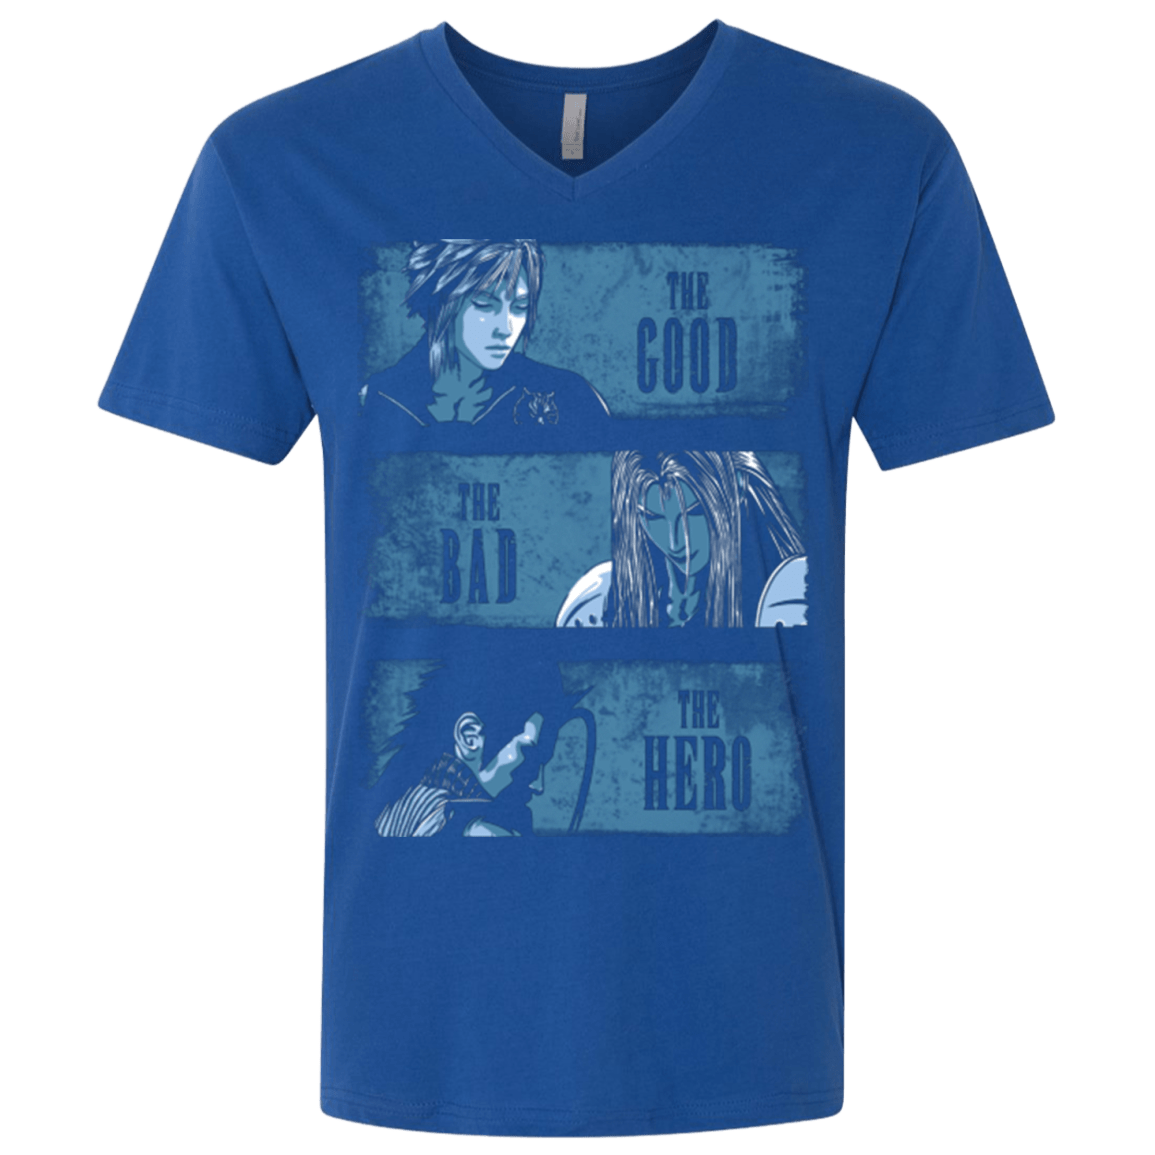 T-Shirts Royal / X-Small The Good the Bad and the Hero Men's Premium V-Neck